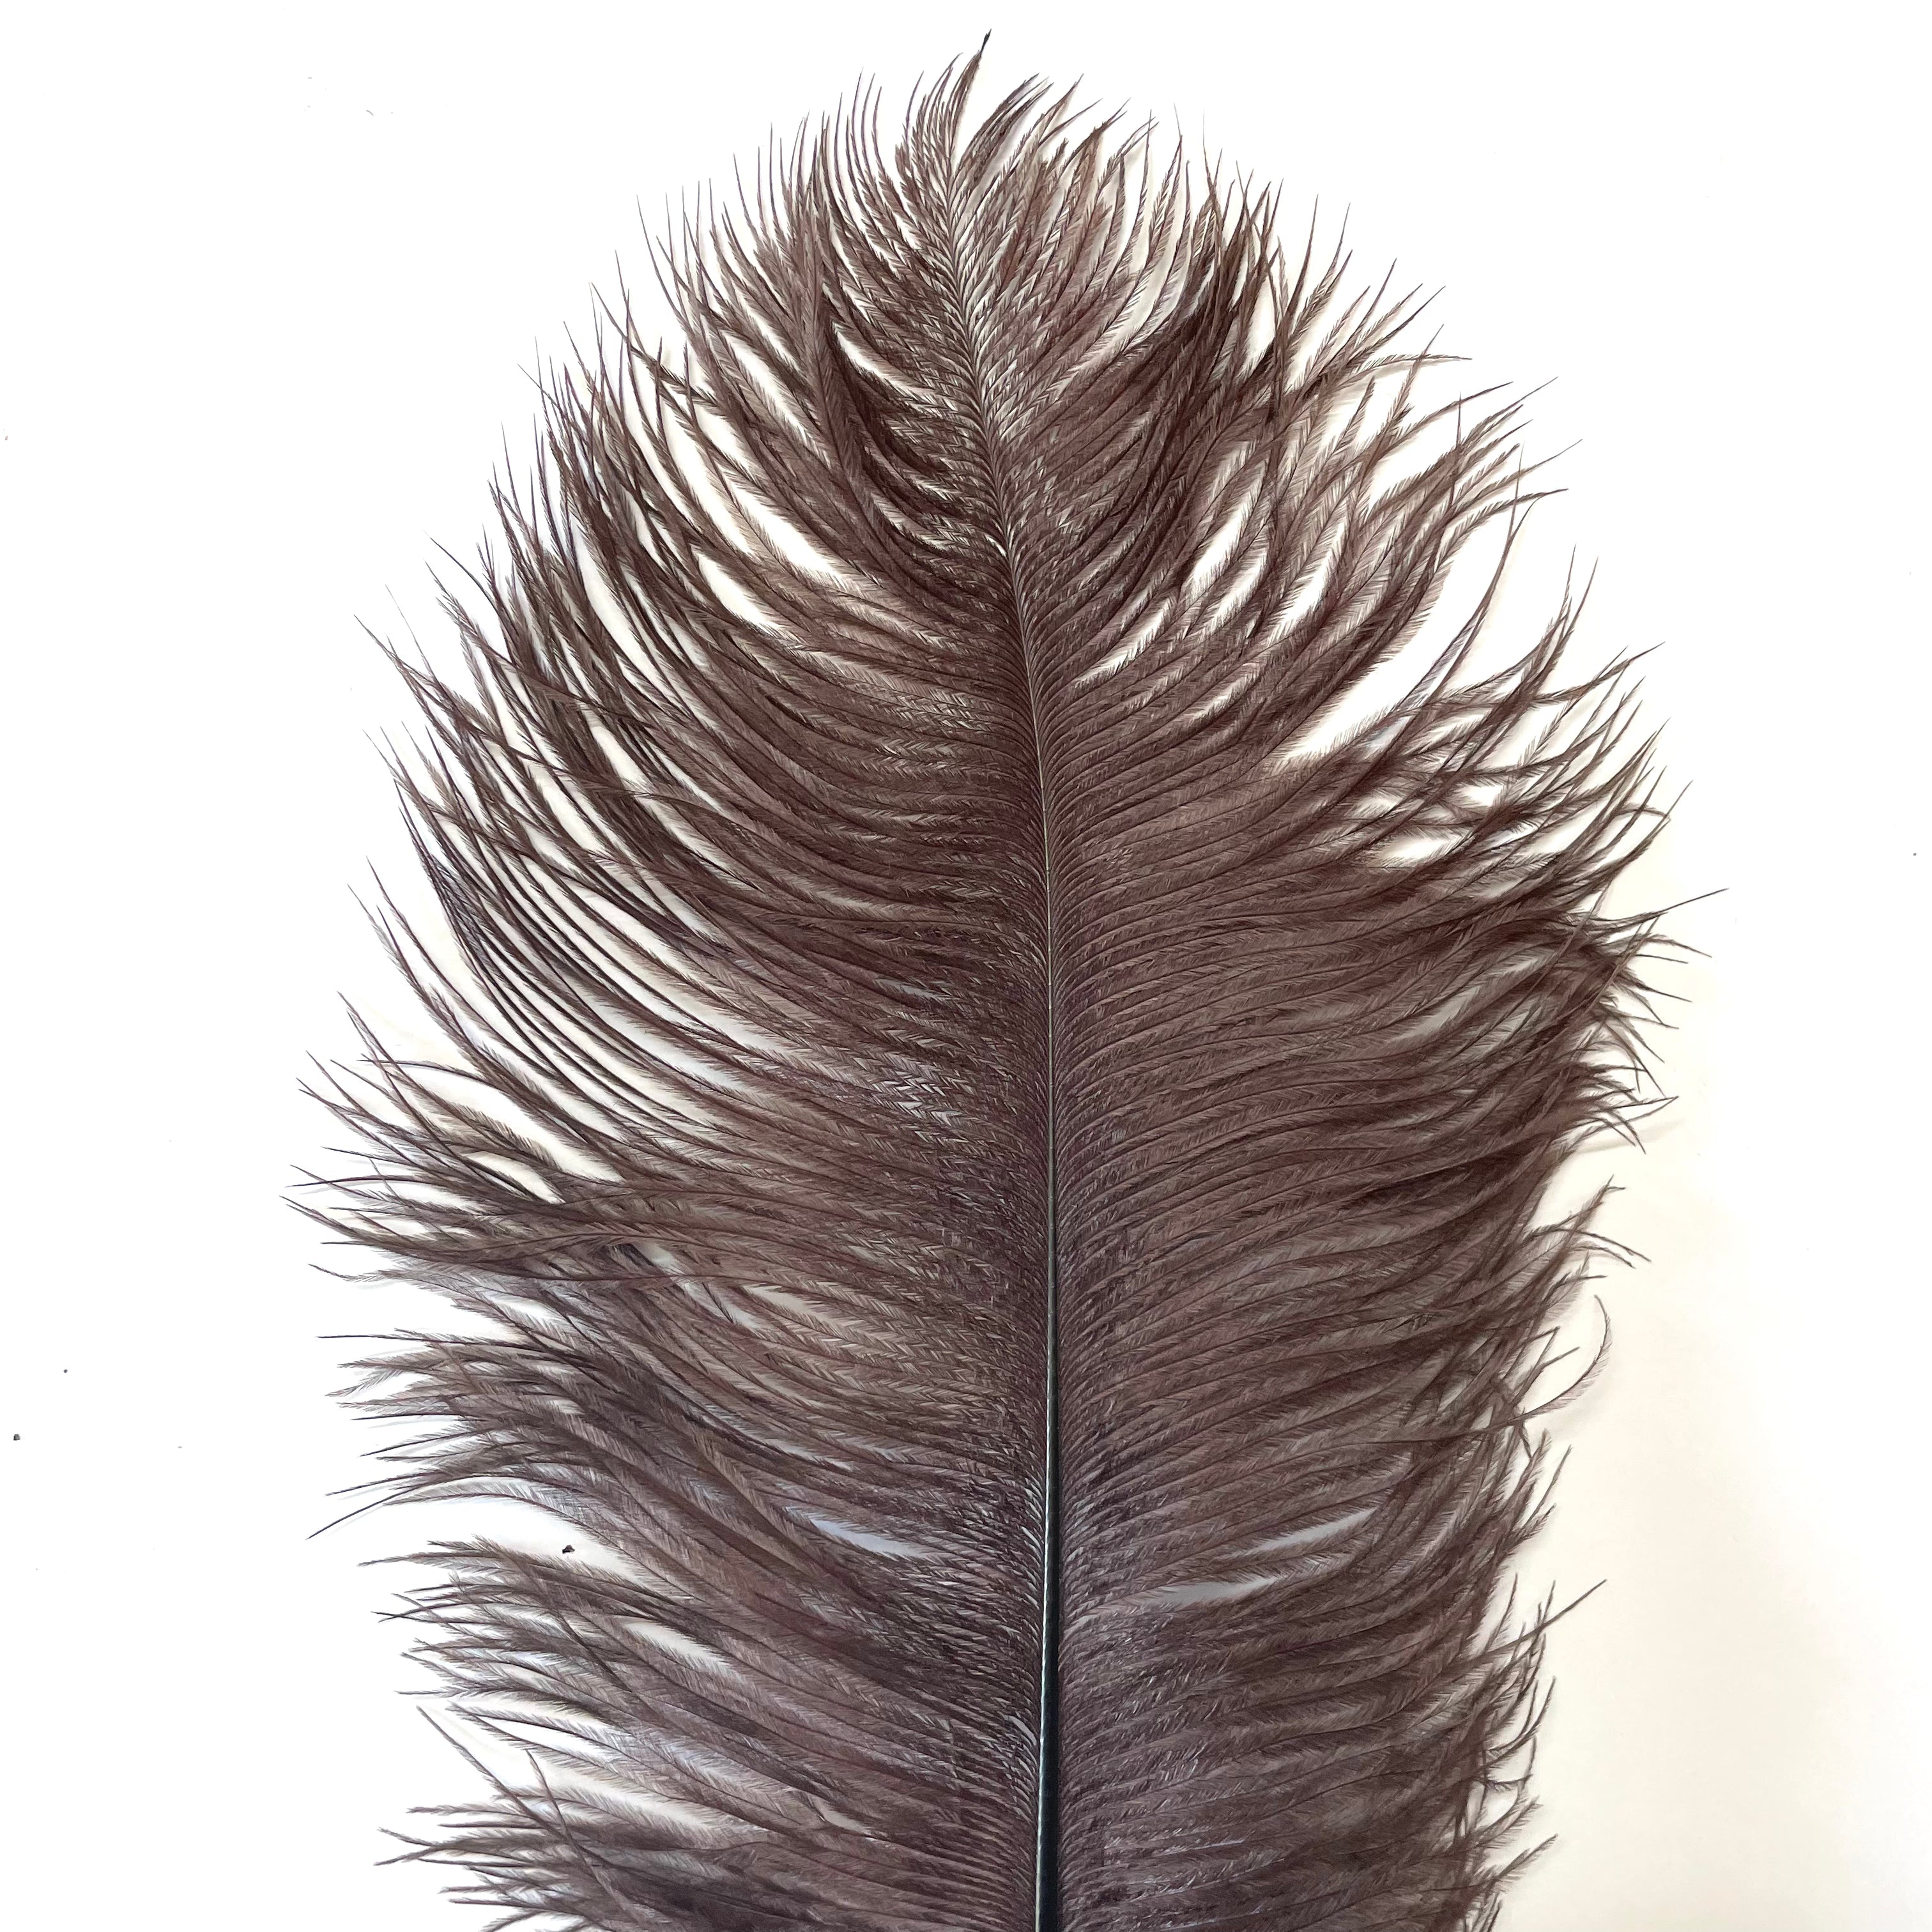 Ostrich Feather Drab 37-42cm x 5 pcs - Chocolate Brown ((SECONDS))